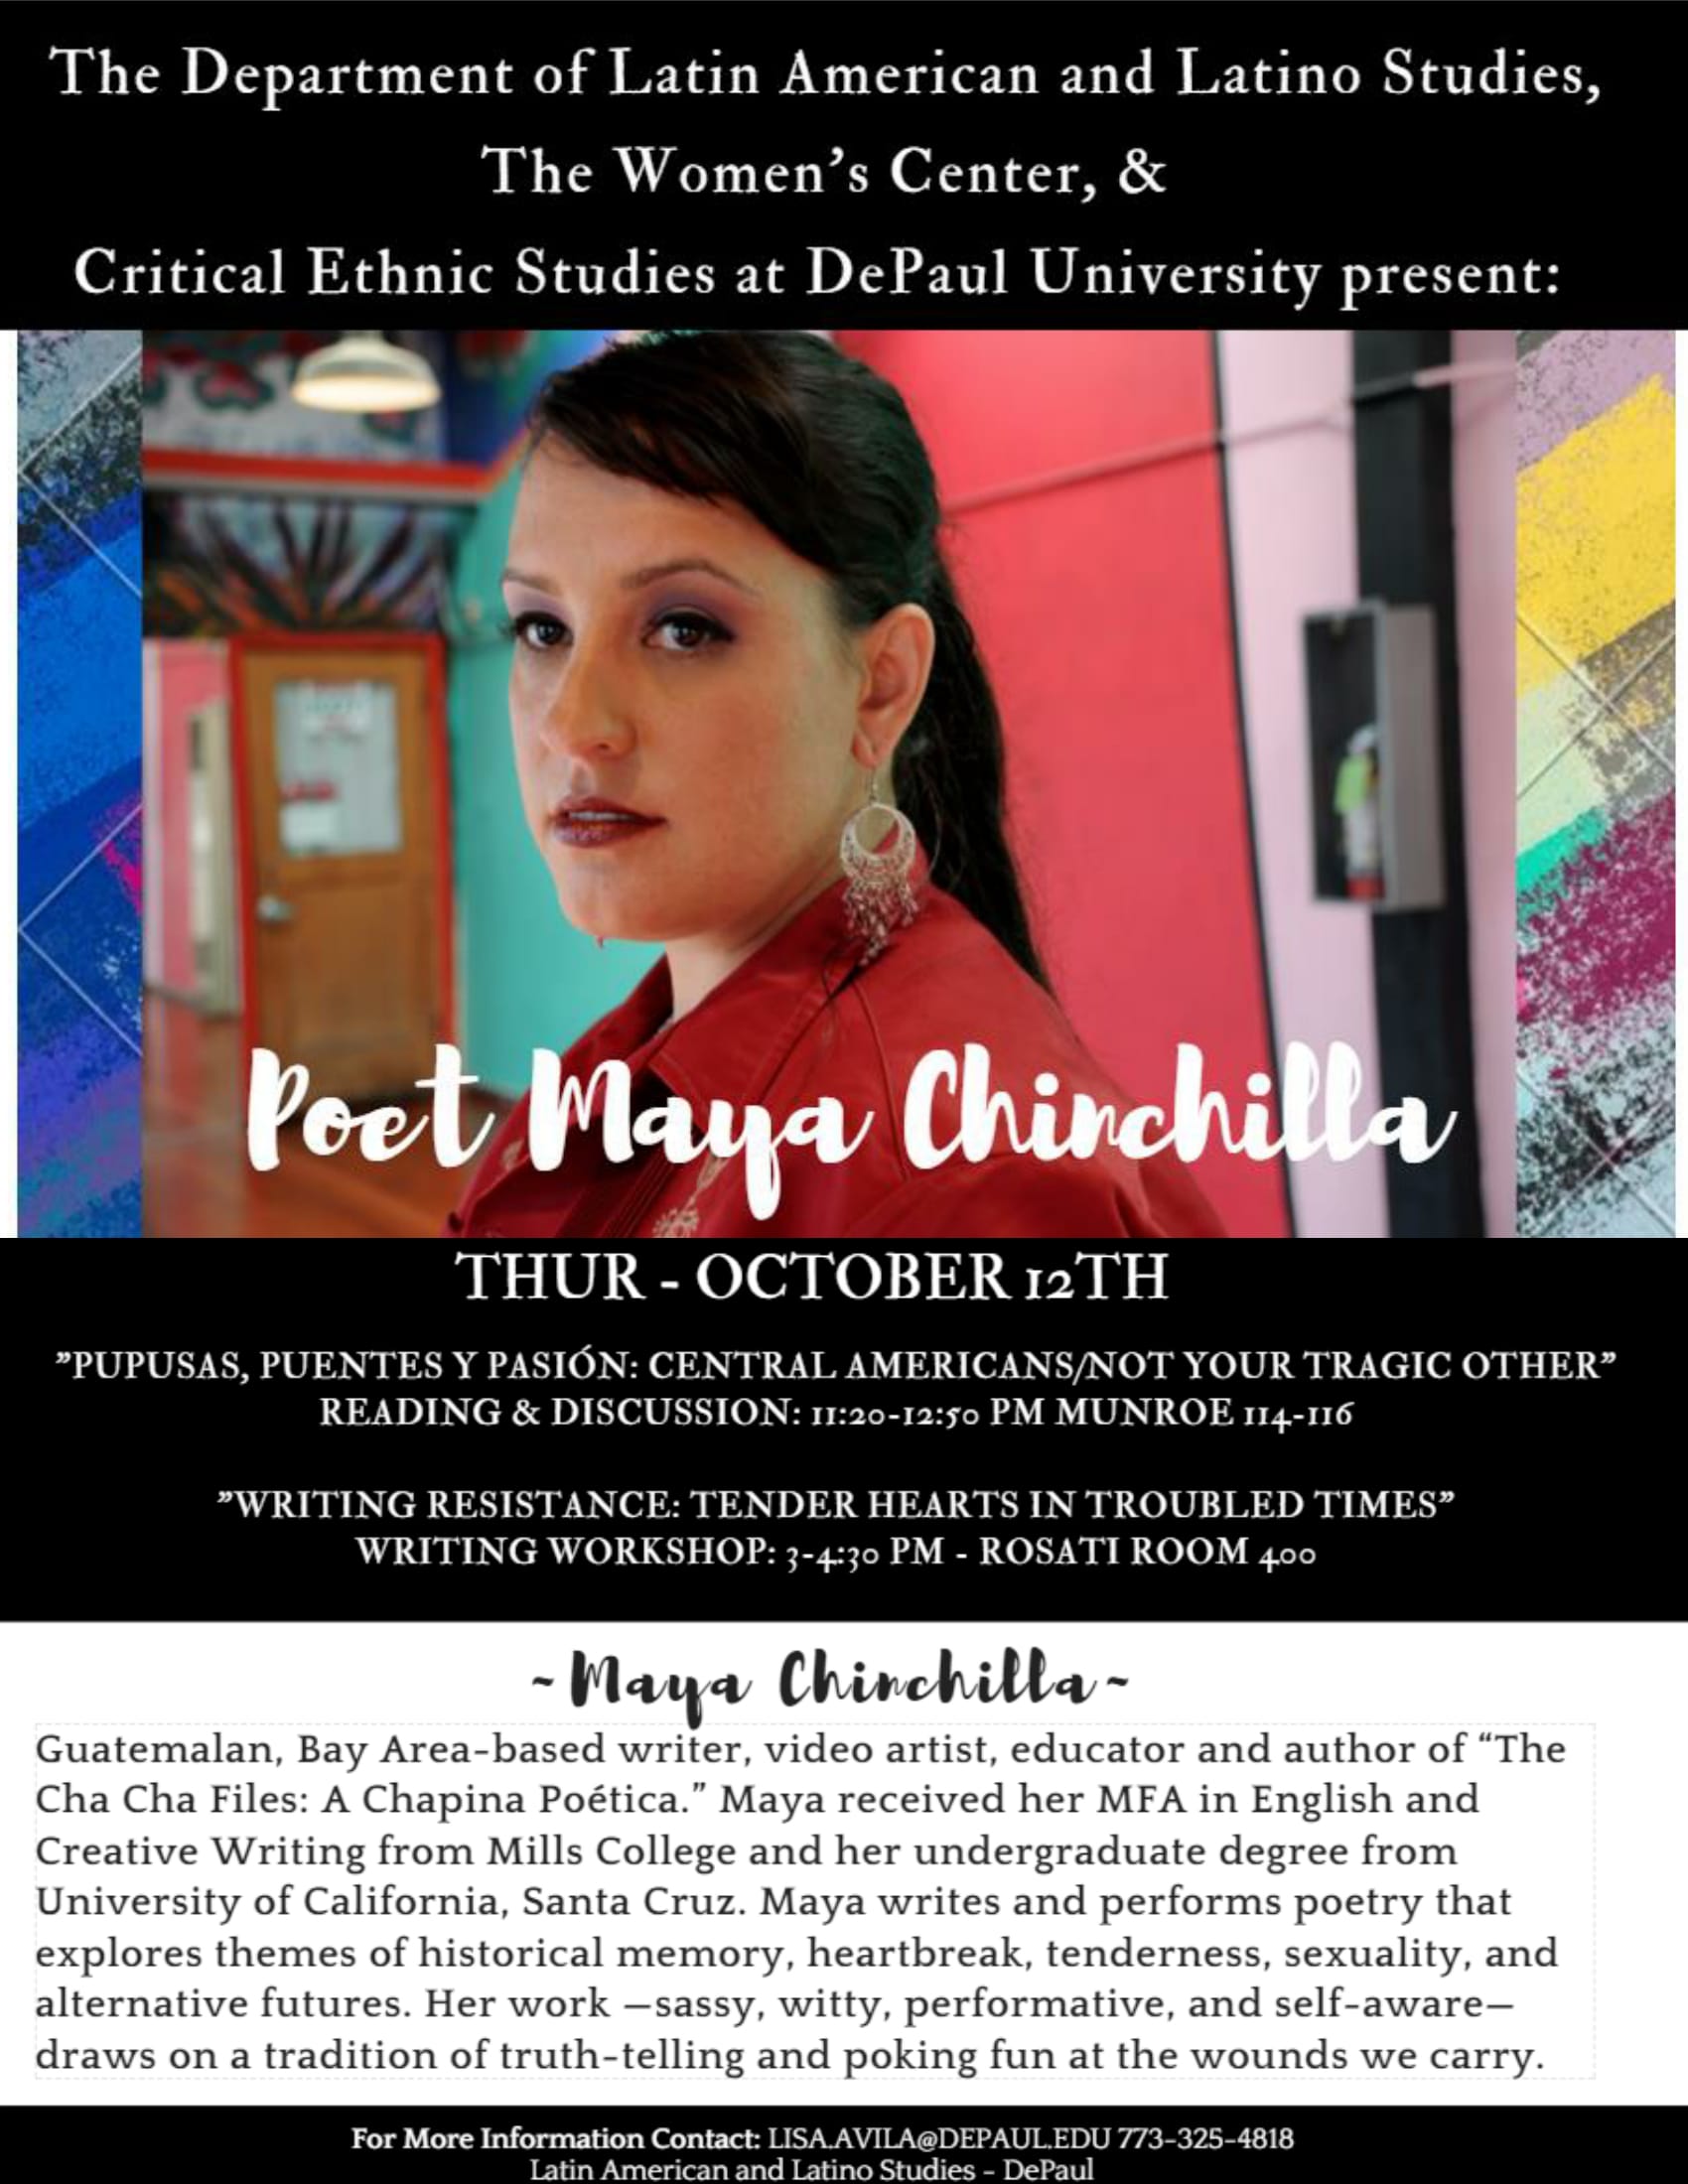 Poet Maya Chinchilla reading, discussion, and workshop at DePaul